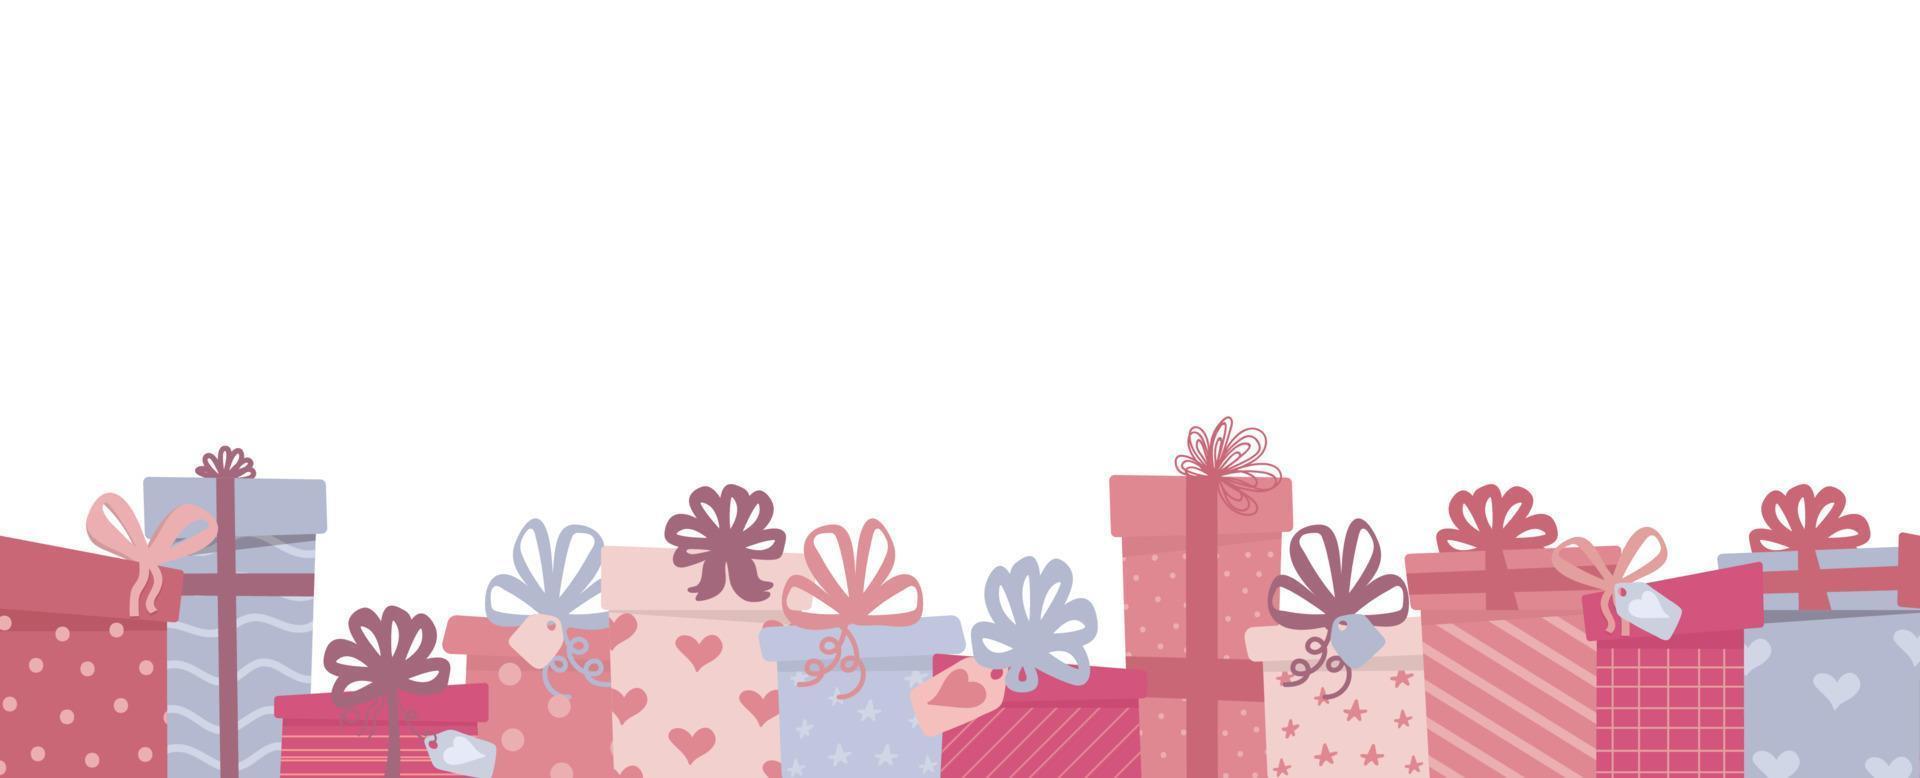 Gift box seamless border. Repeating pattern with colorful wrapped presents red white. Gift box with bows design. For birthdays, celebrations, Christmas, Valentines day, cards. vector